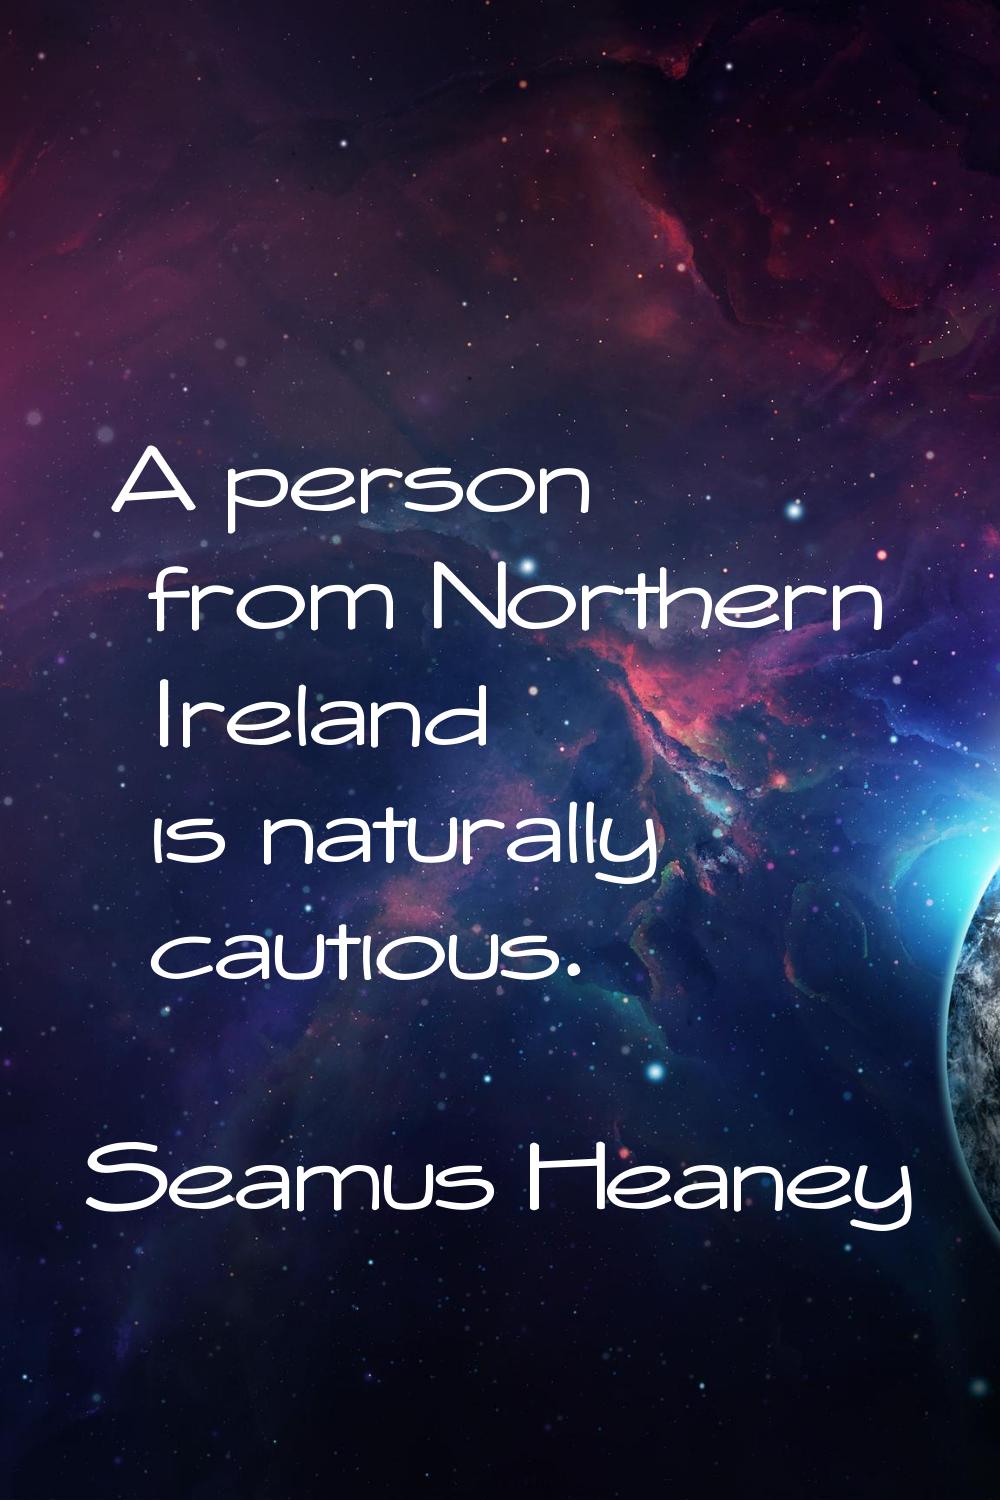 A person from Northern Ireland is naturally cautious.